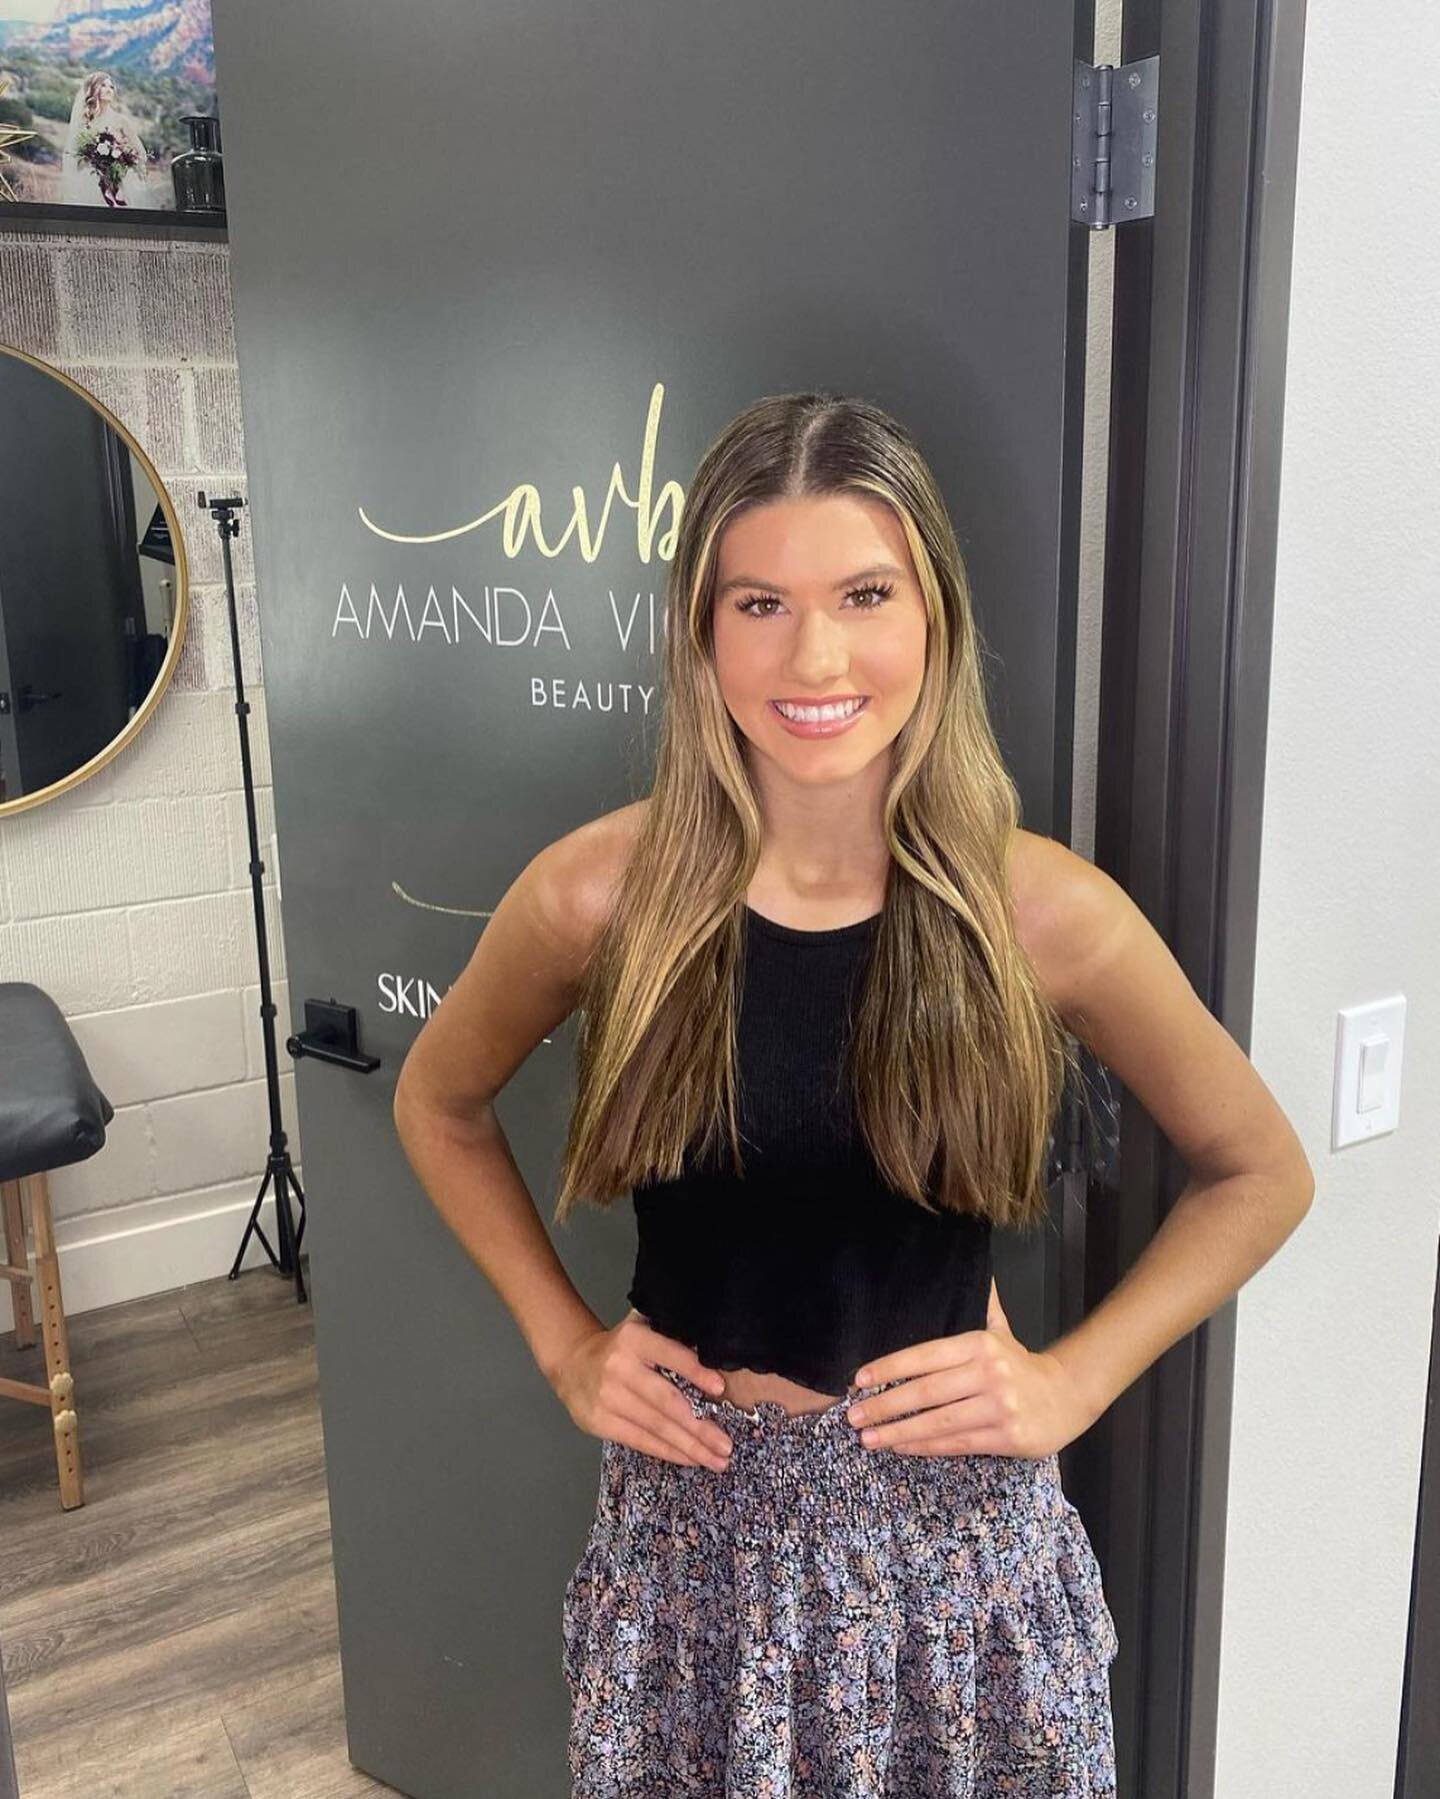 @maoteenaz has been working so hard preparing for the #MissAmericasOutstandingTeen competition with some of our incredible sponsors! Hair/makeup lessons with @amandavictoriabeauty, mental management training with @heathersumlin, that skin glow with @